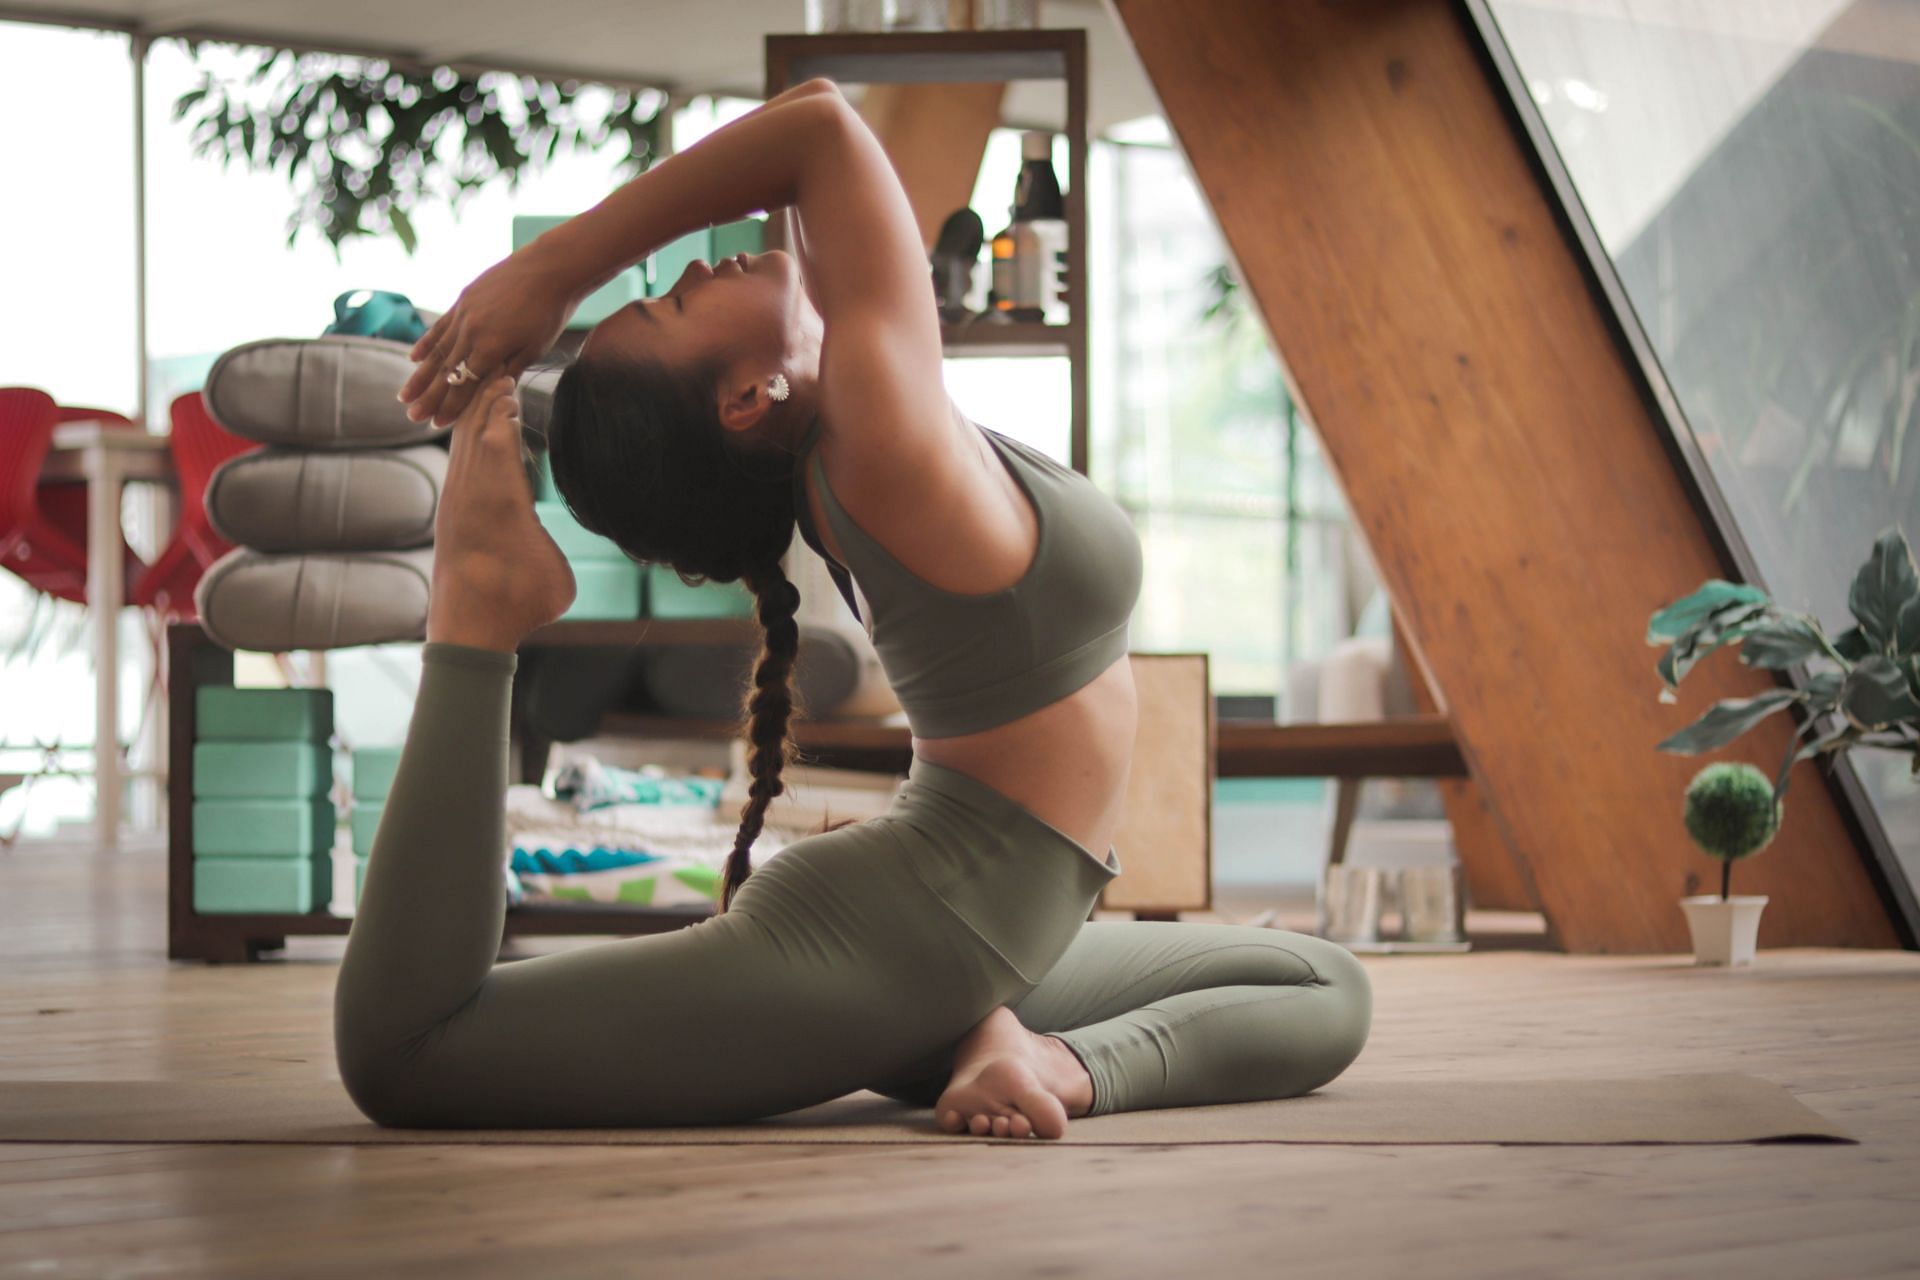 Feeling bloated? Read this Yoga for constipation guide. (Image via Unsplash / Carl Barcelo)